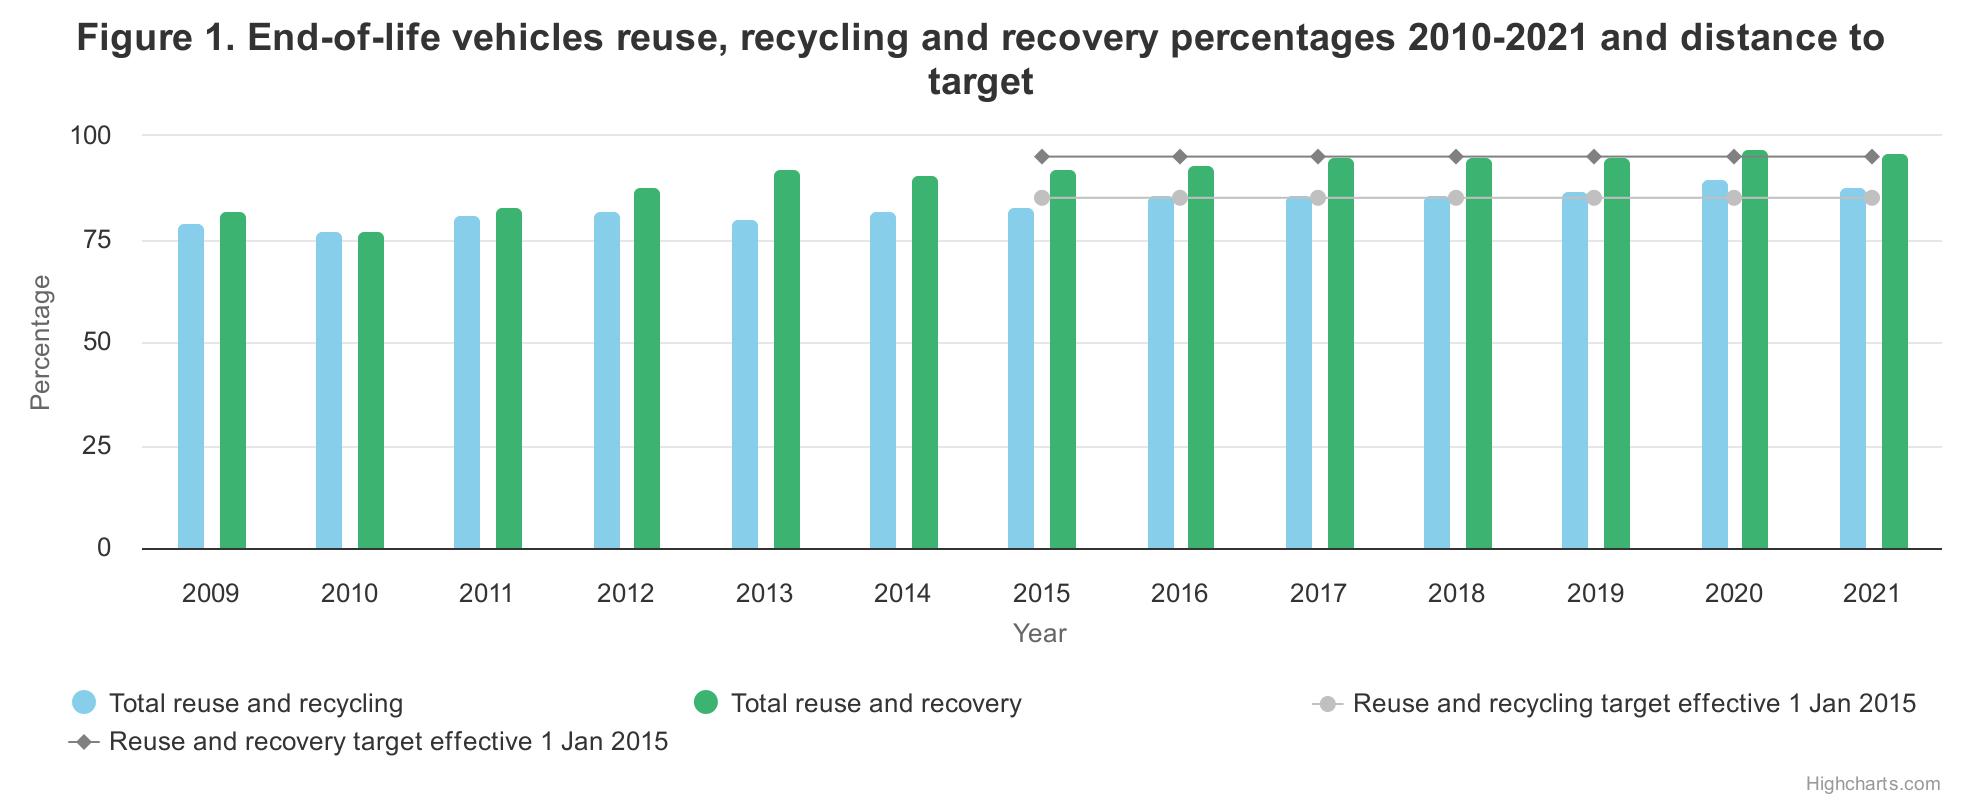 Figure 1 shows that Ireland’s ‘Total reuse and recycling’ rate for ELVs decreased from 90.33% in 2020 to 87.81% in 2021.  The figure shows that while there has been an increasing trend in the percentage since 2010, there has been a slight decline in 2021 compared to 2020. Figure 1 shows that the ‘Total reuse and recovery’ rate for ELVs decreased from 97.12% in 2020 to 95.74% in 2021.  The figure s